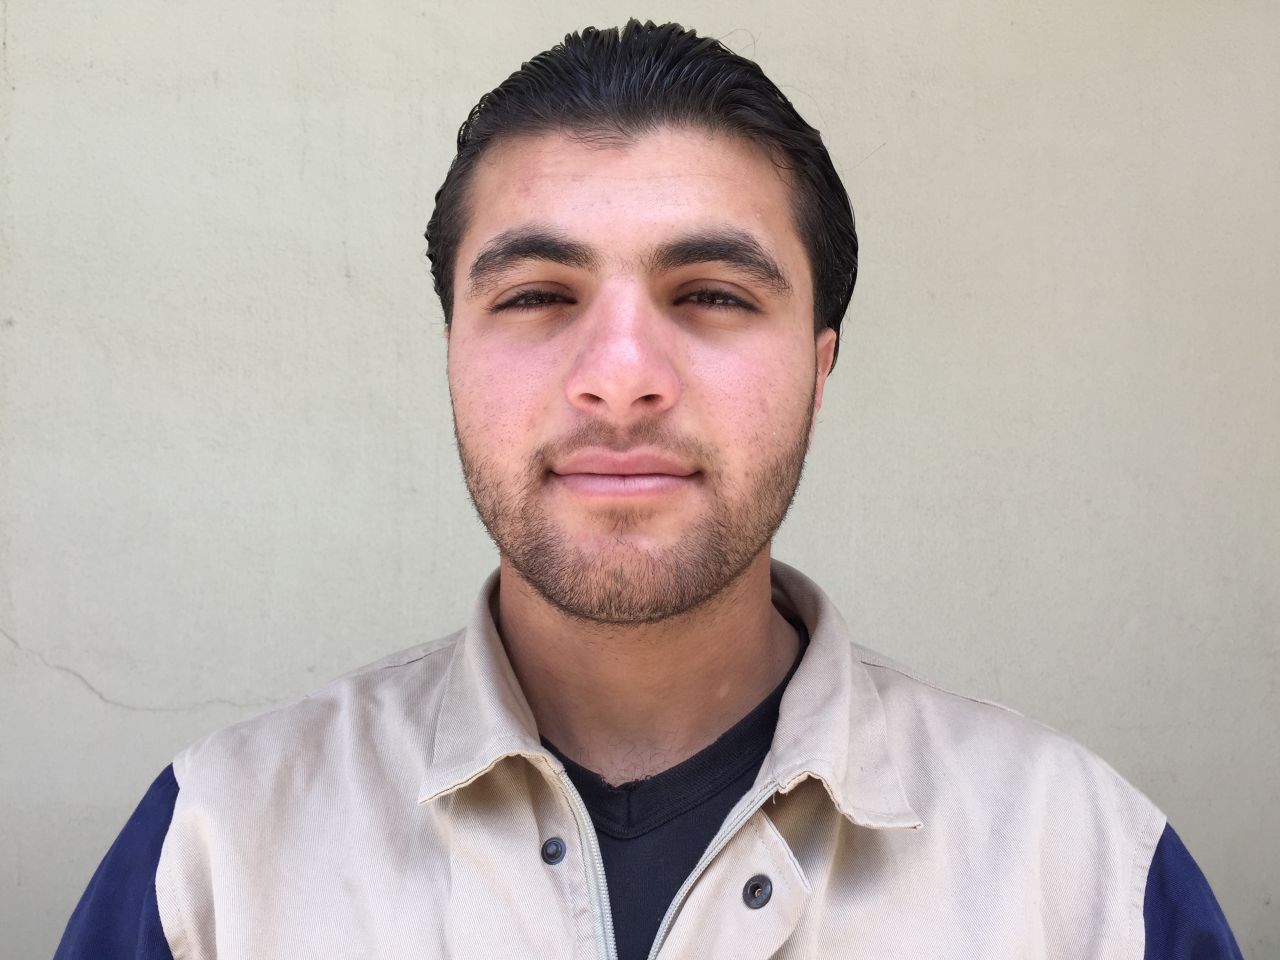 Abdulkareem Qaddour, 20. Was in high school. "A barrel bomb dropped near my best friend. He had shrapnel in his head, neck and chest. I took him by ambulance to the hospital, but he died on his way to the operating room."